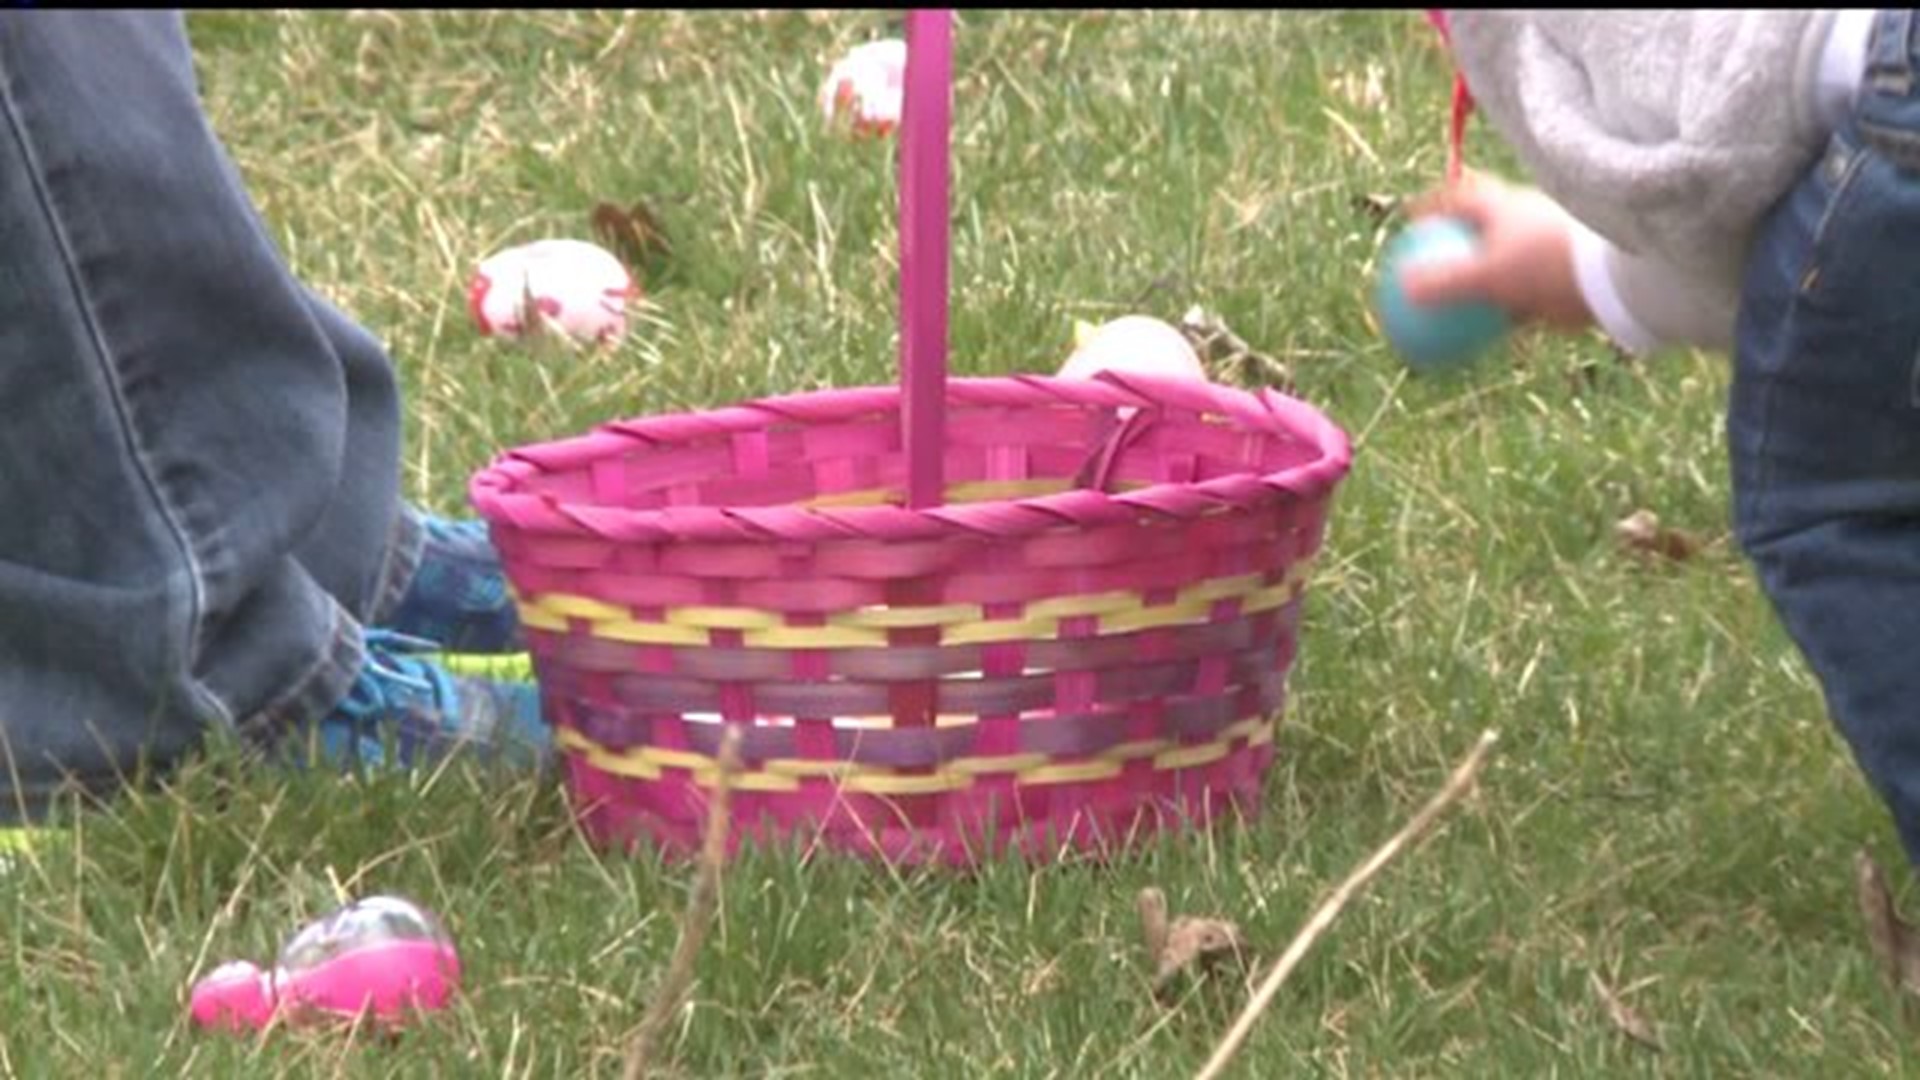 Experts say people should switch to more eco-friendly decorations like wooden Easter eggs or live flowers.